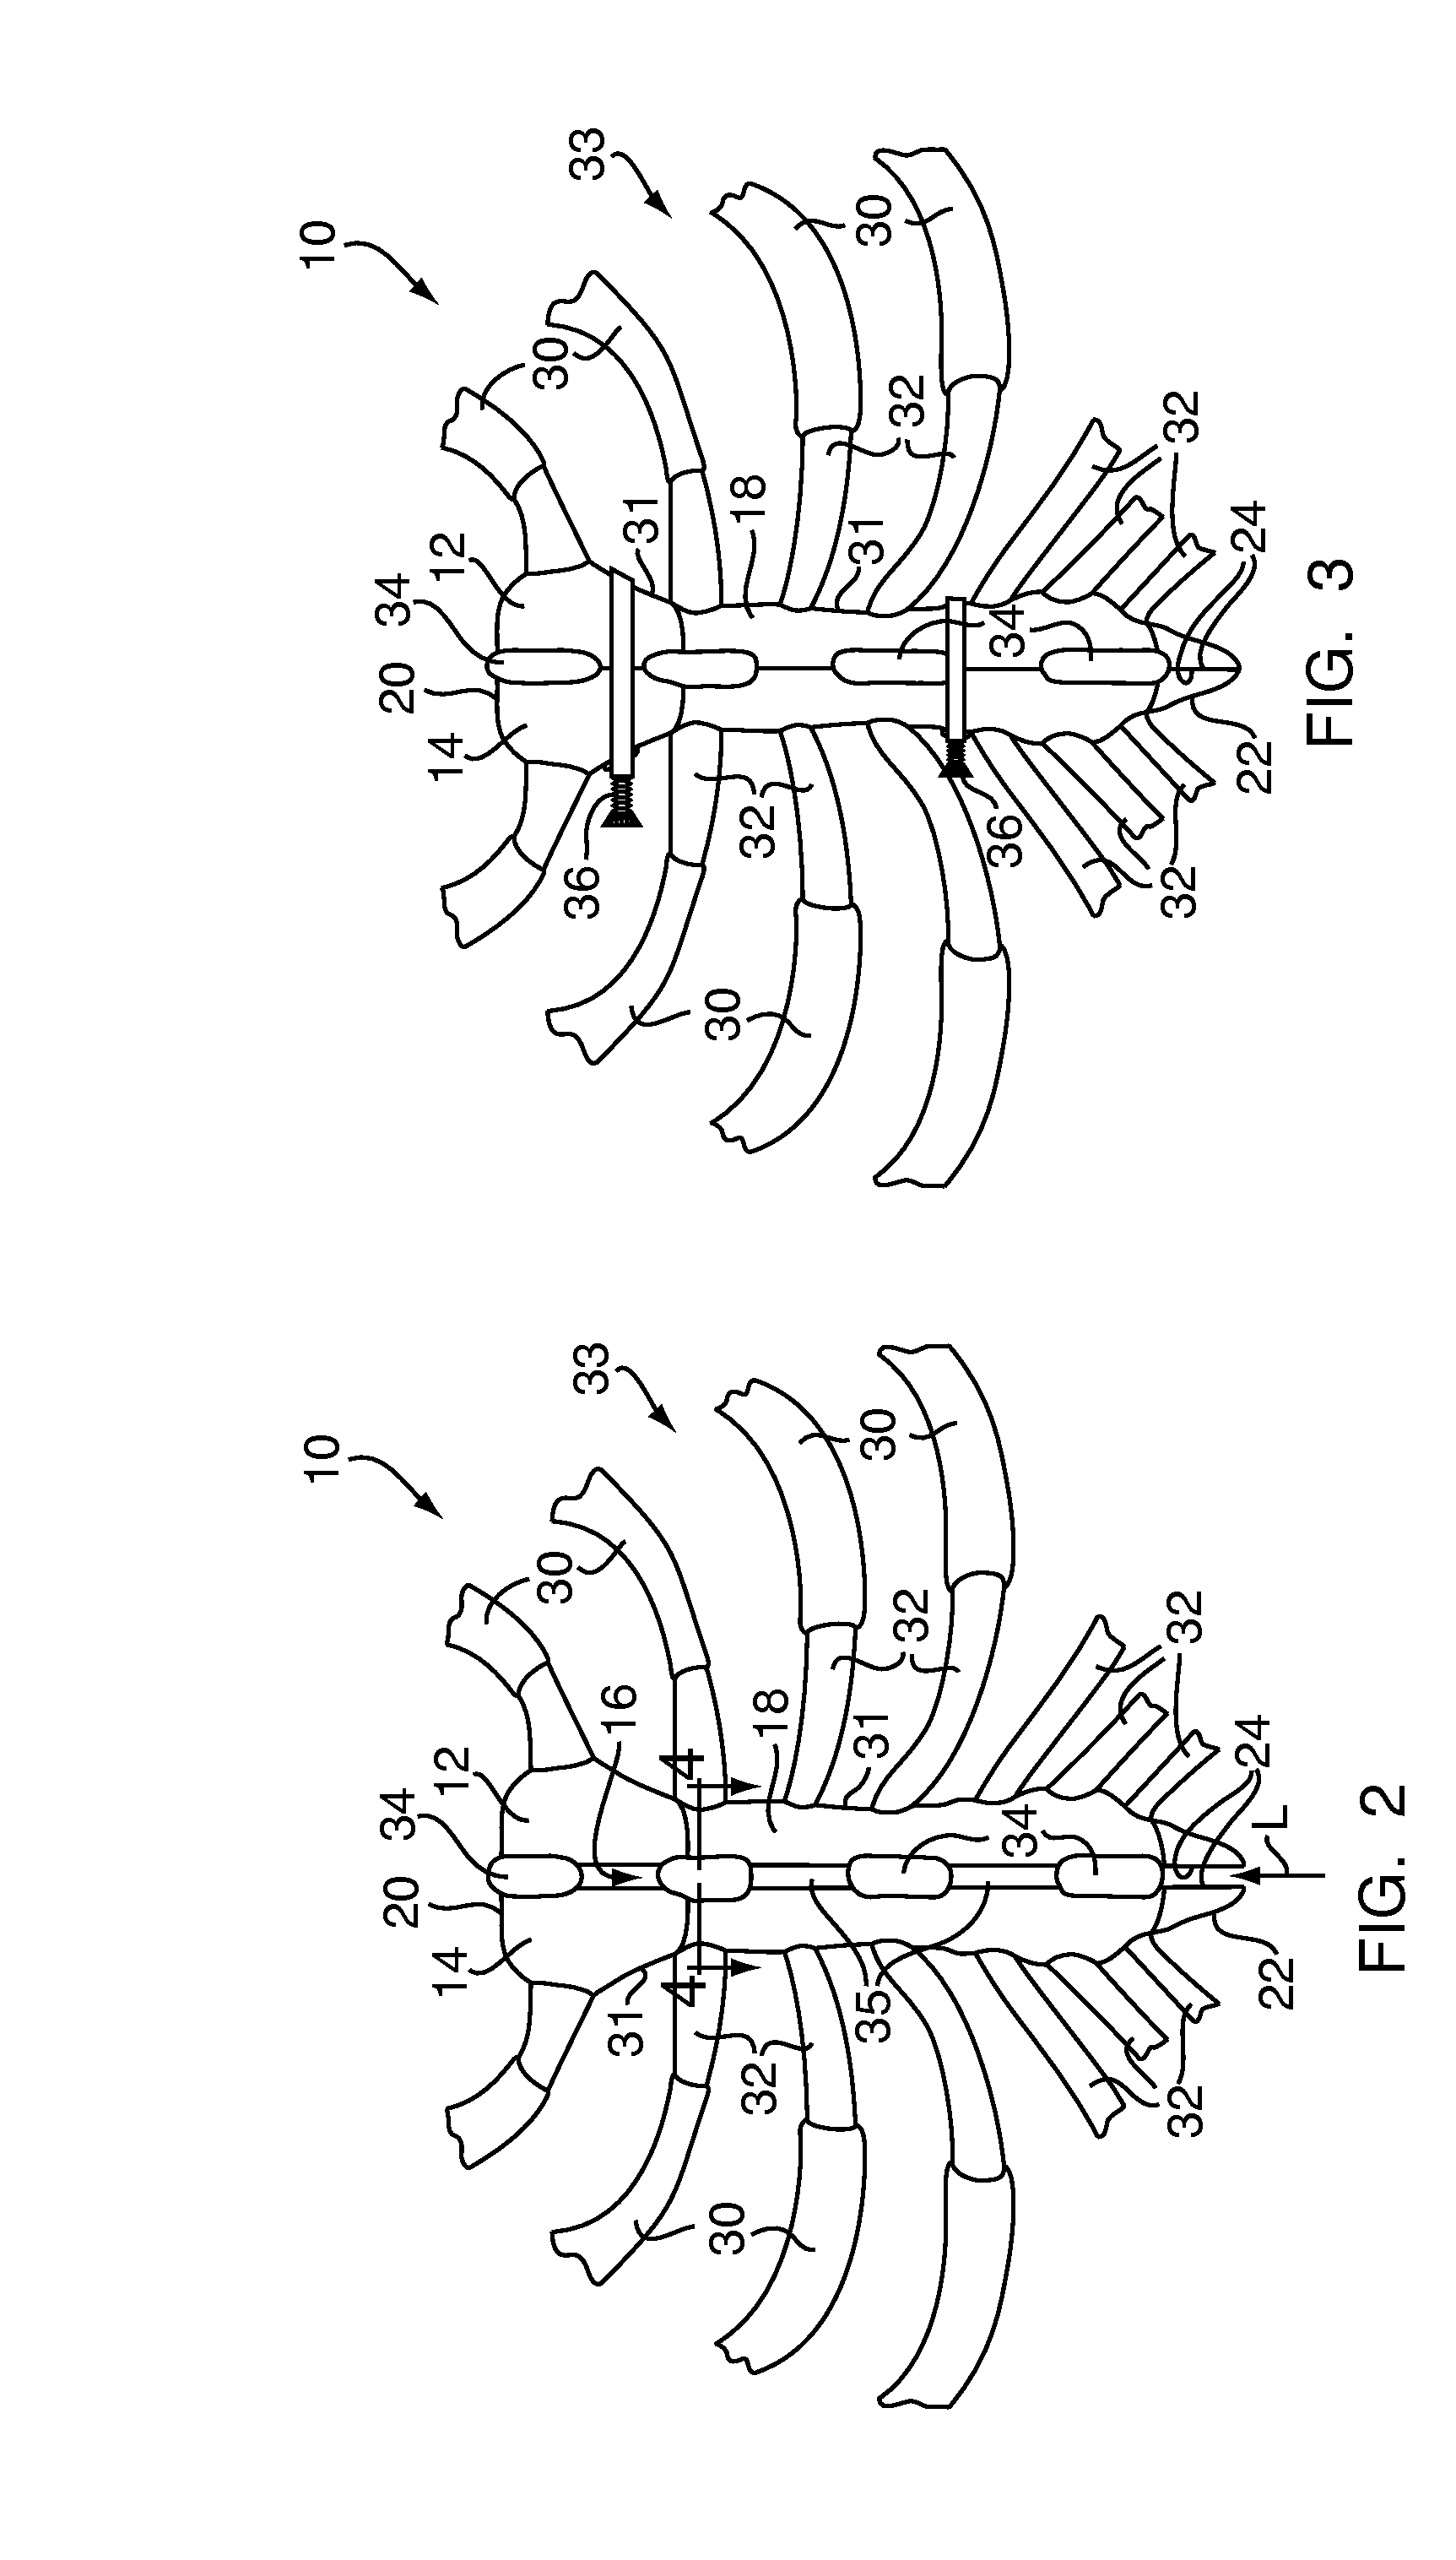 Methods and devices for sternal closure